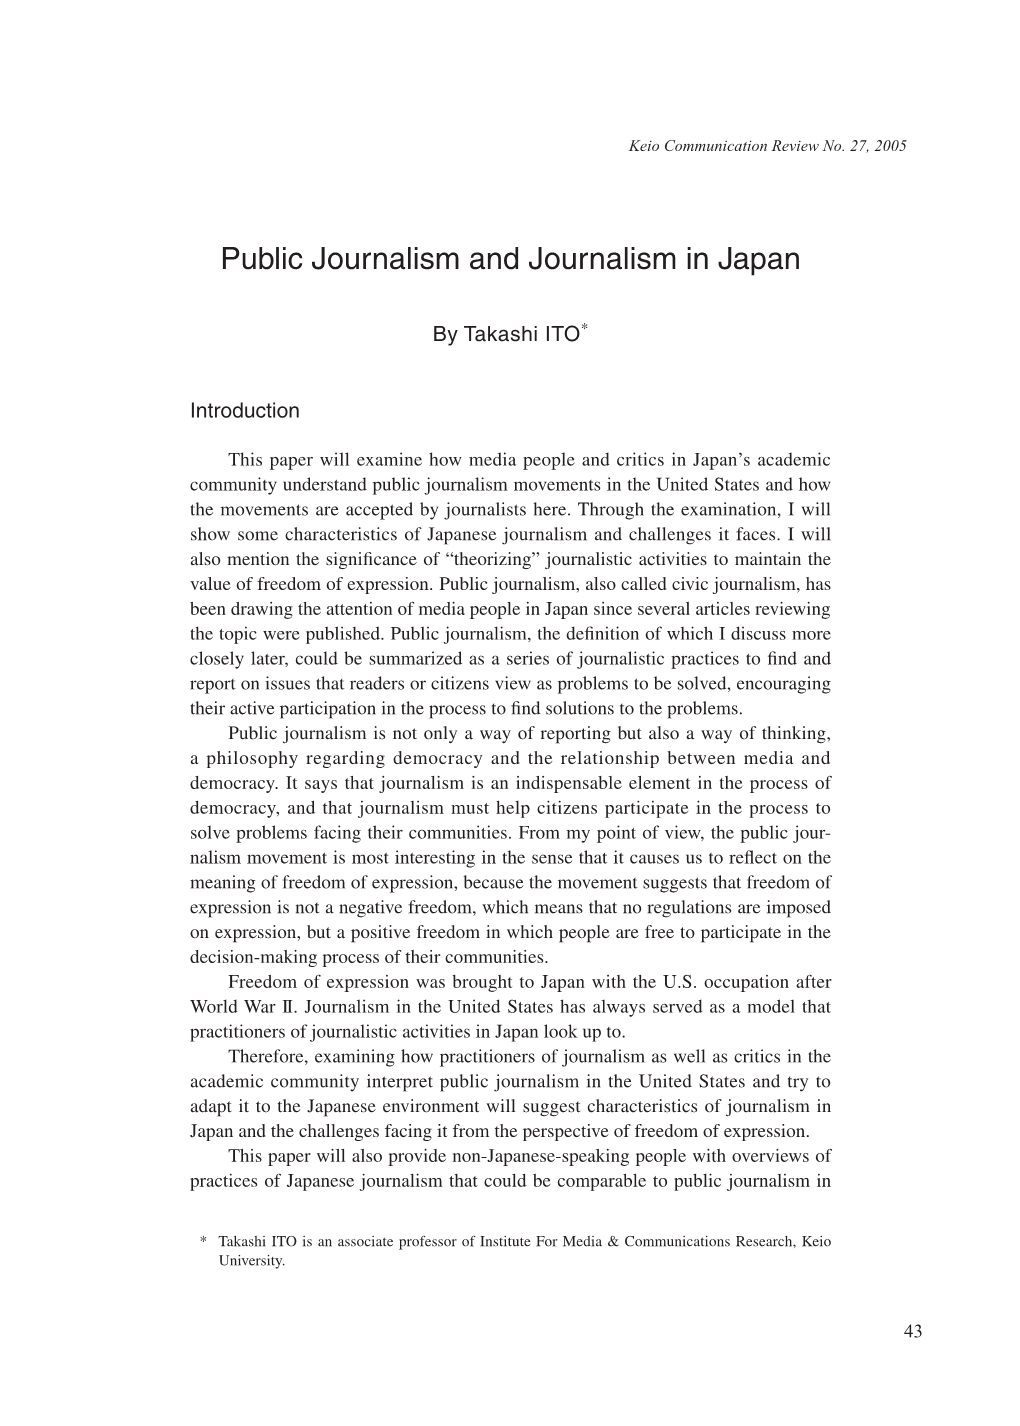 Public Journalism and Journalism in Japan